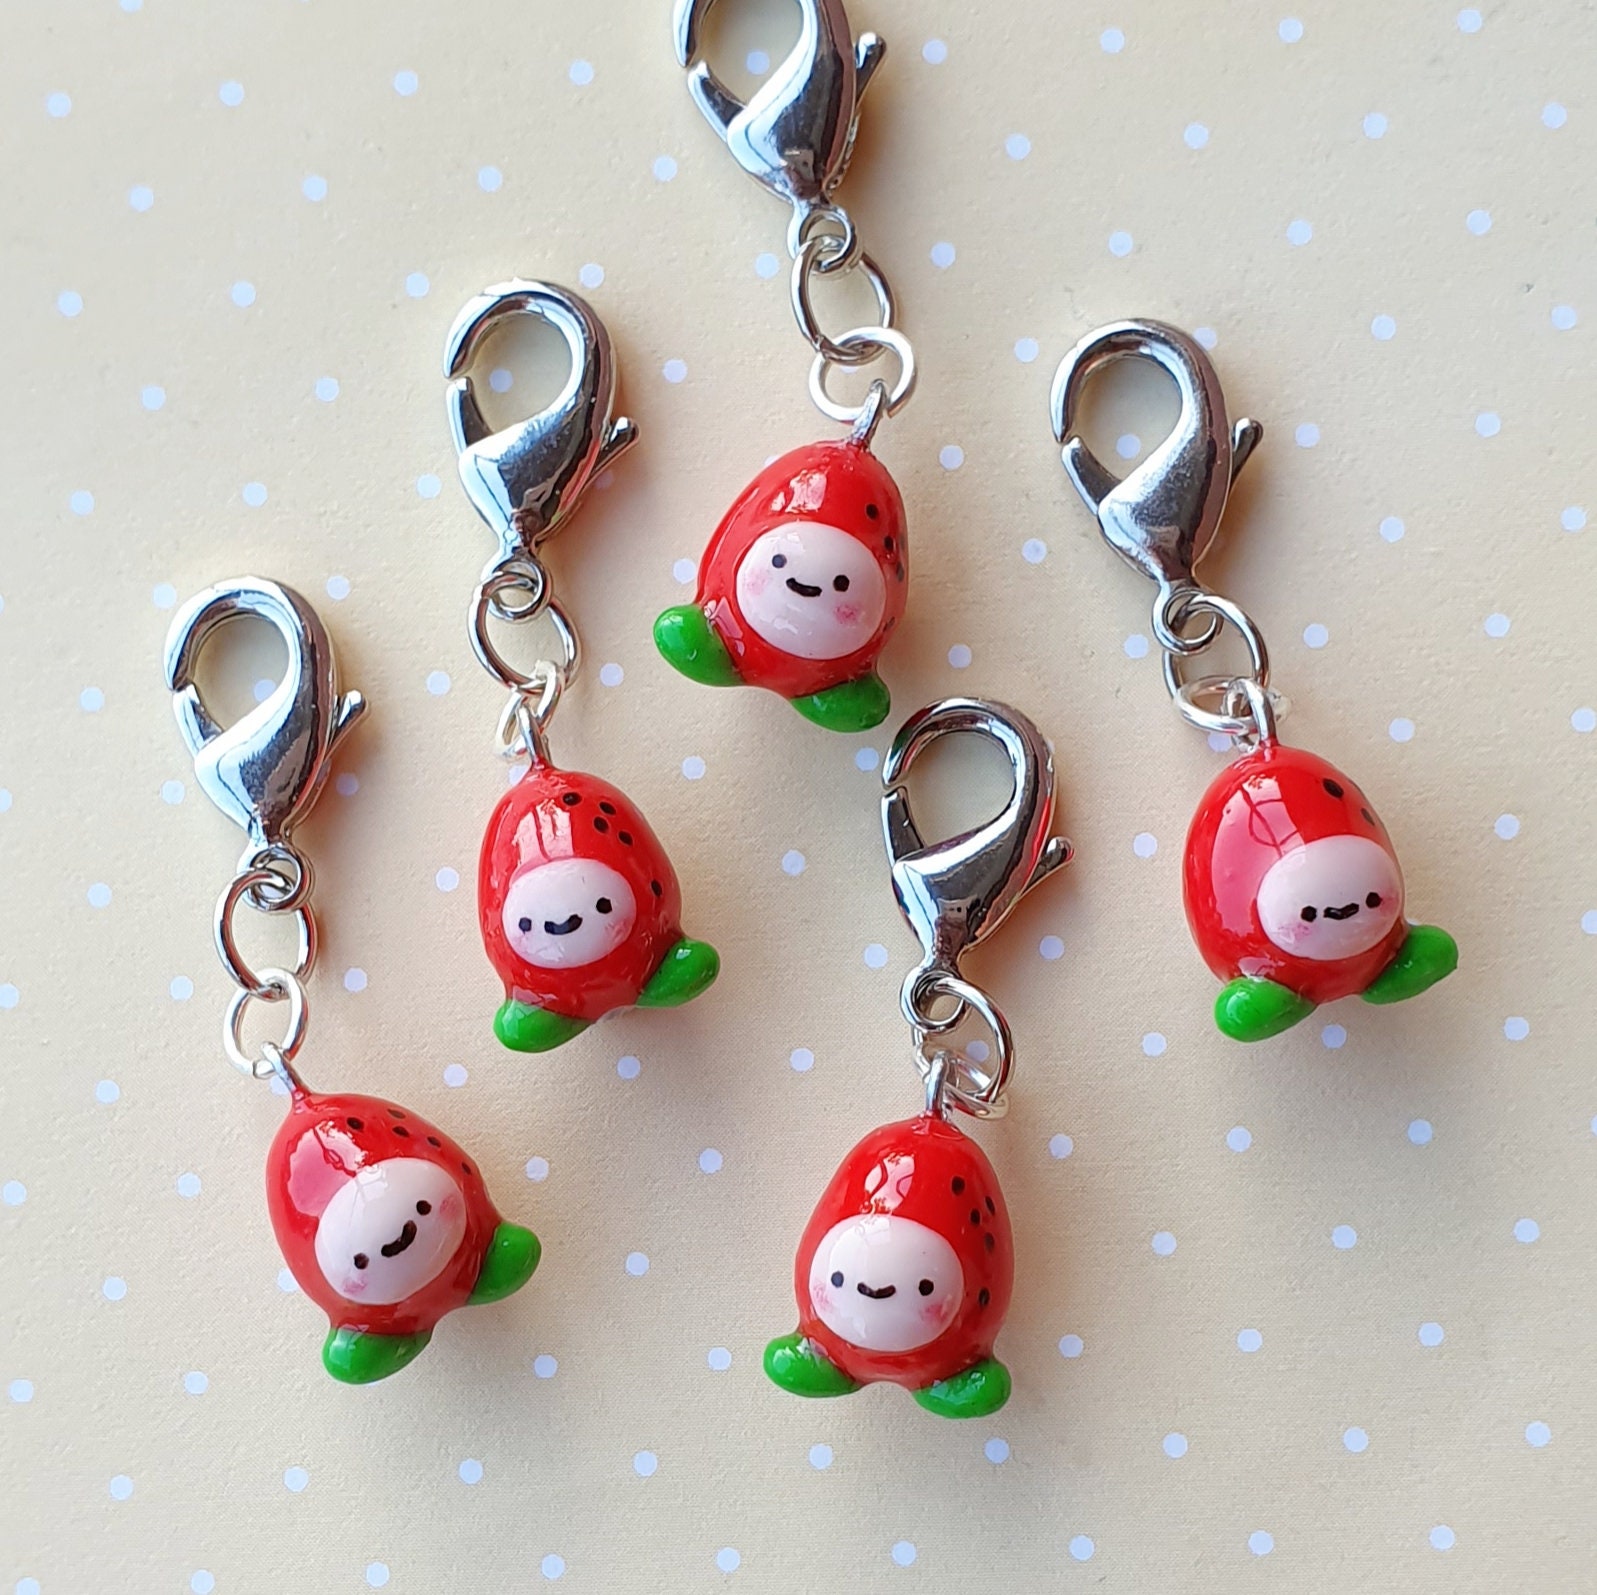 Tamagotchi Clay Charms / Kawaii Charms/polymer Clay/planner  Charms/tamagotchi Animals/necklace/keychains 